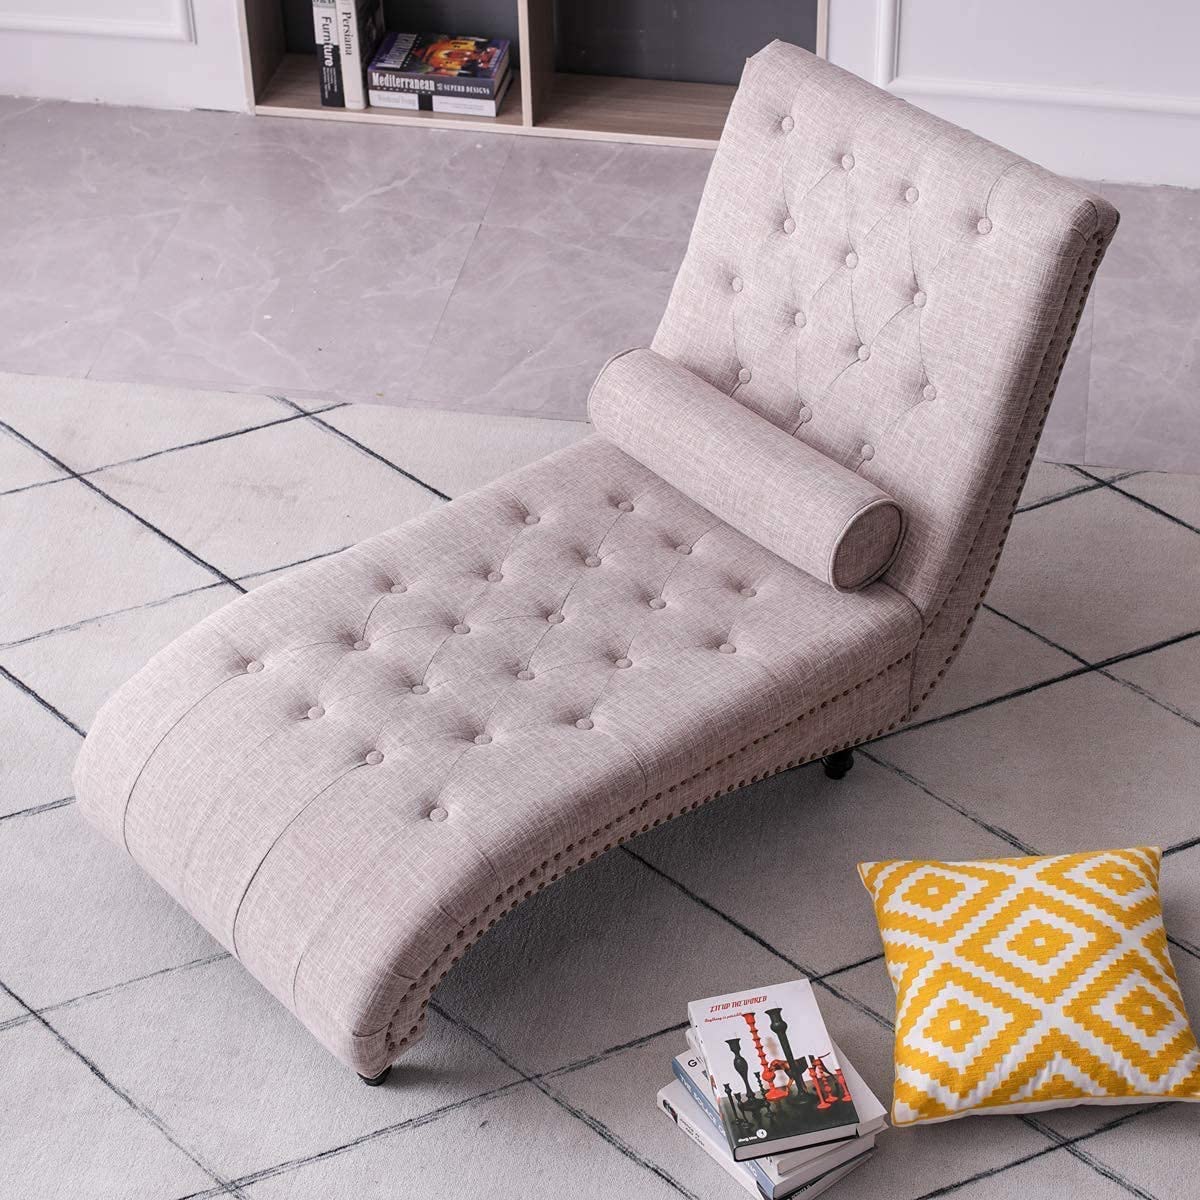 Single Modern Sofa Bed Lounge Lazy Sofa Bed Chair Fabric Recliner Couch Wooden Legs for Home Living Room Bedroom Rest Room Dime Store